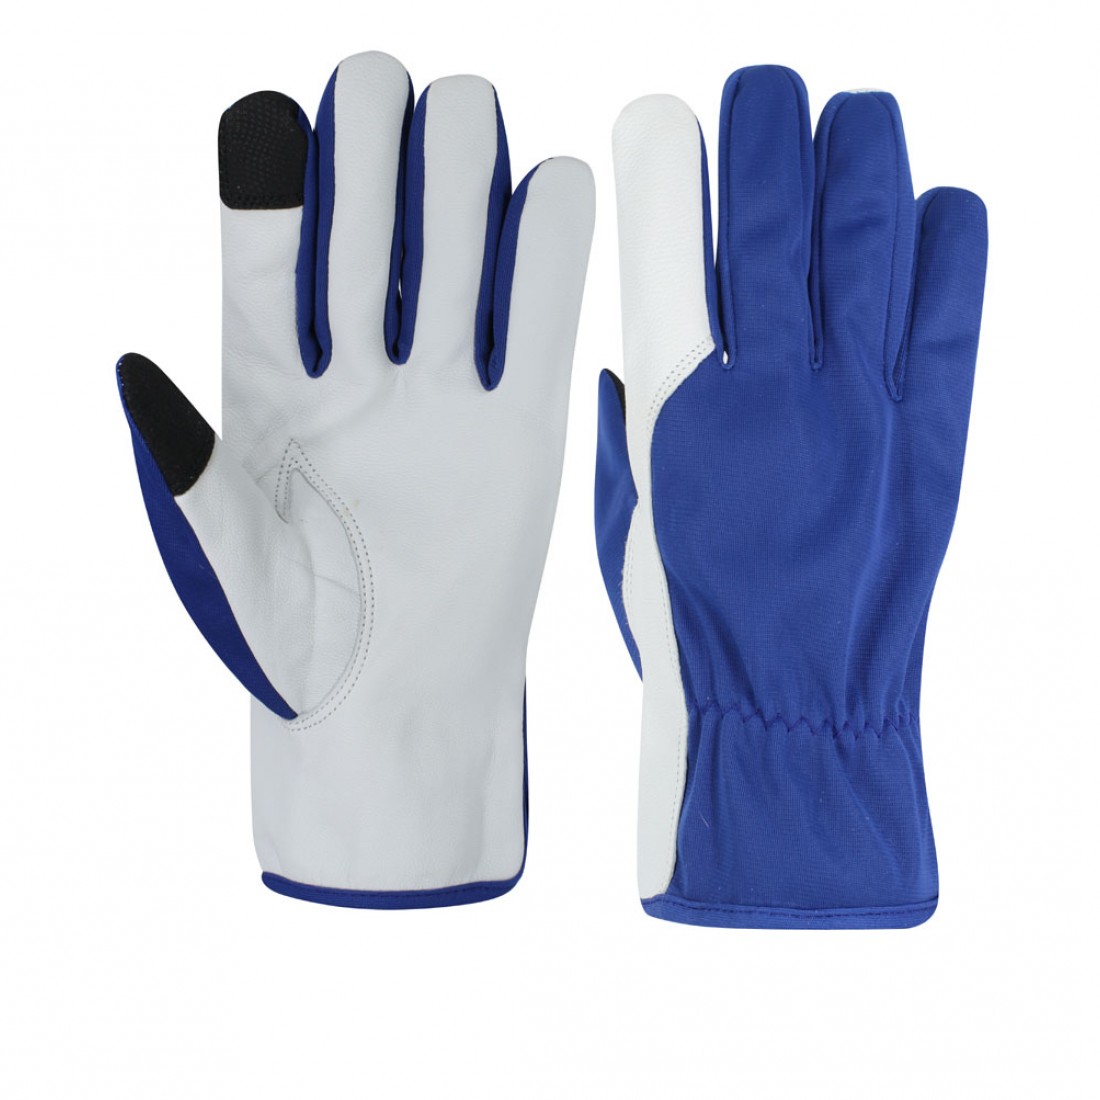 Touch Screen Assembly Work Gloves